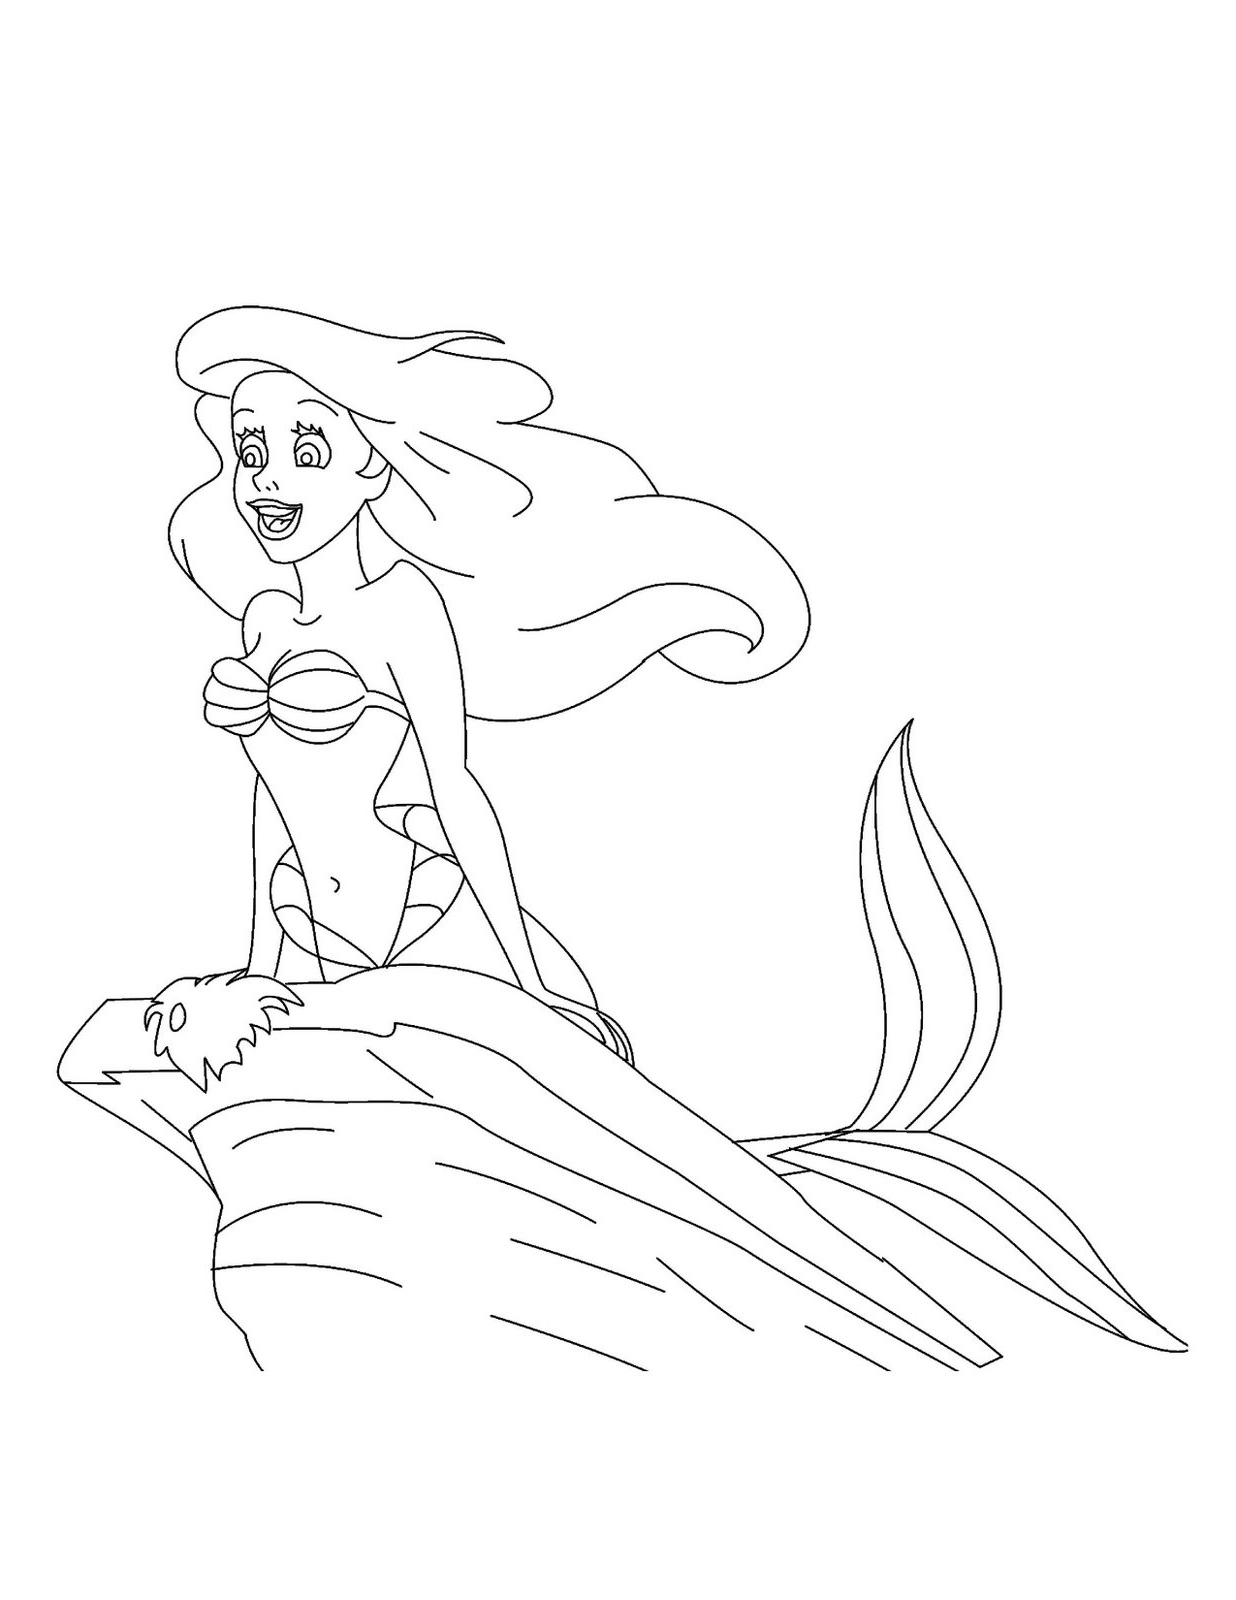 Free Printable Little Mermaid Coloring Pages For Kids